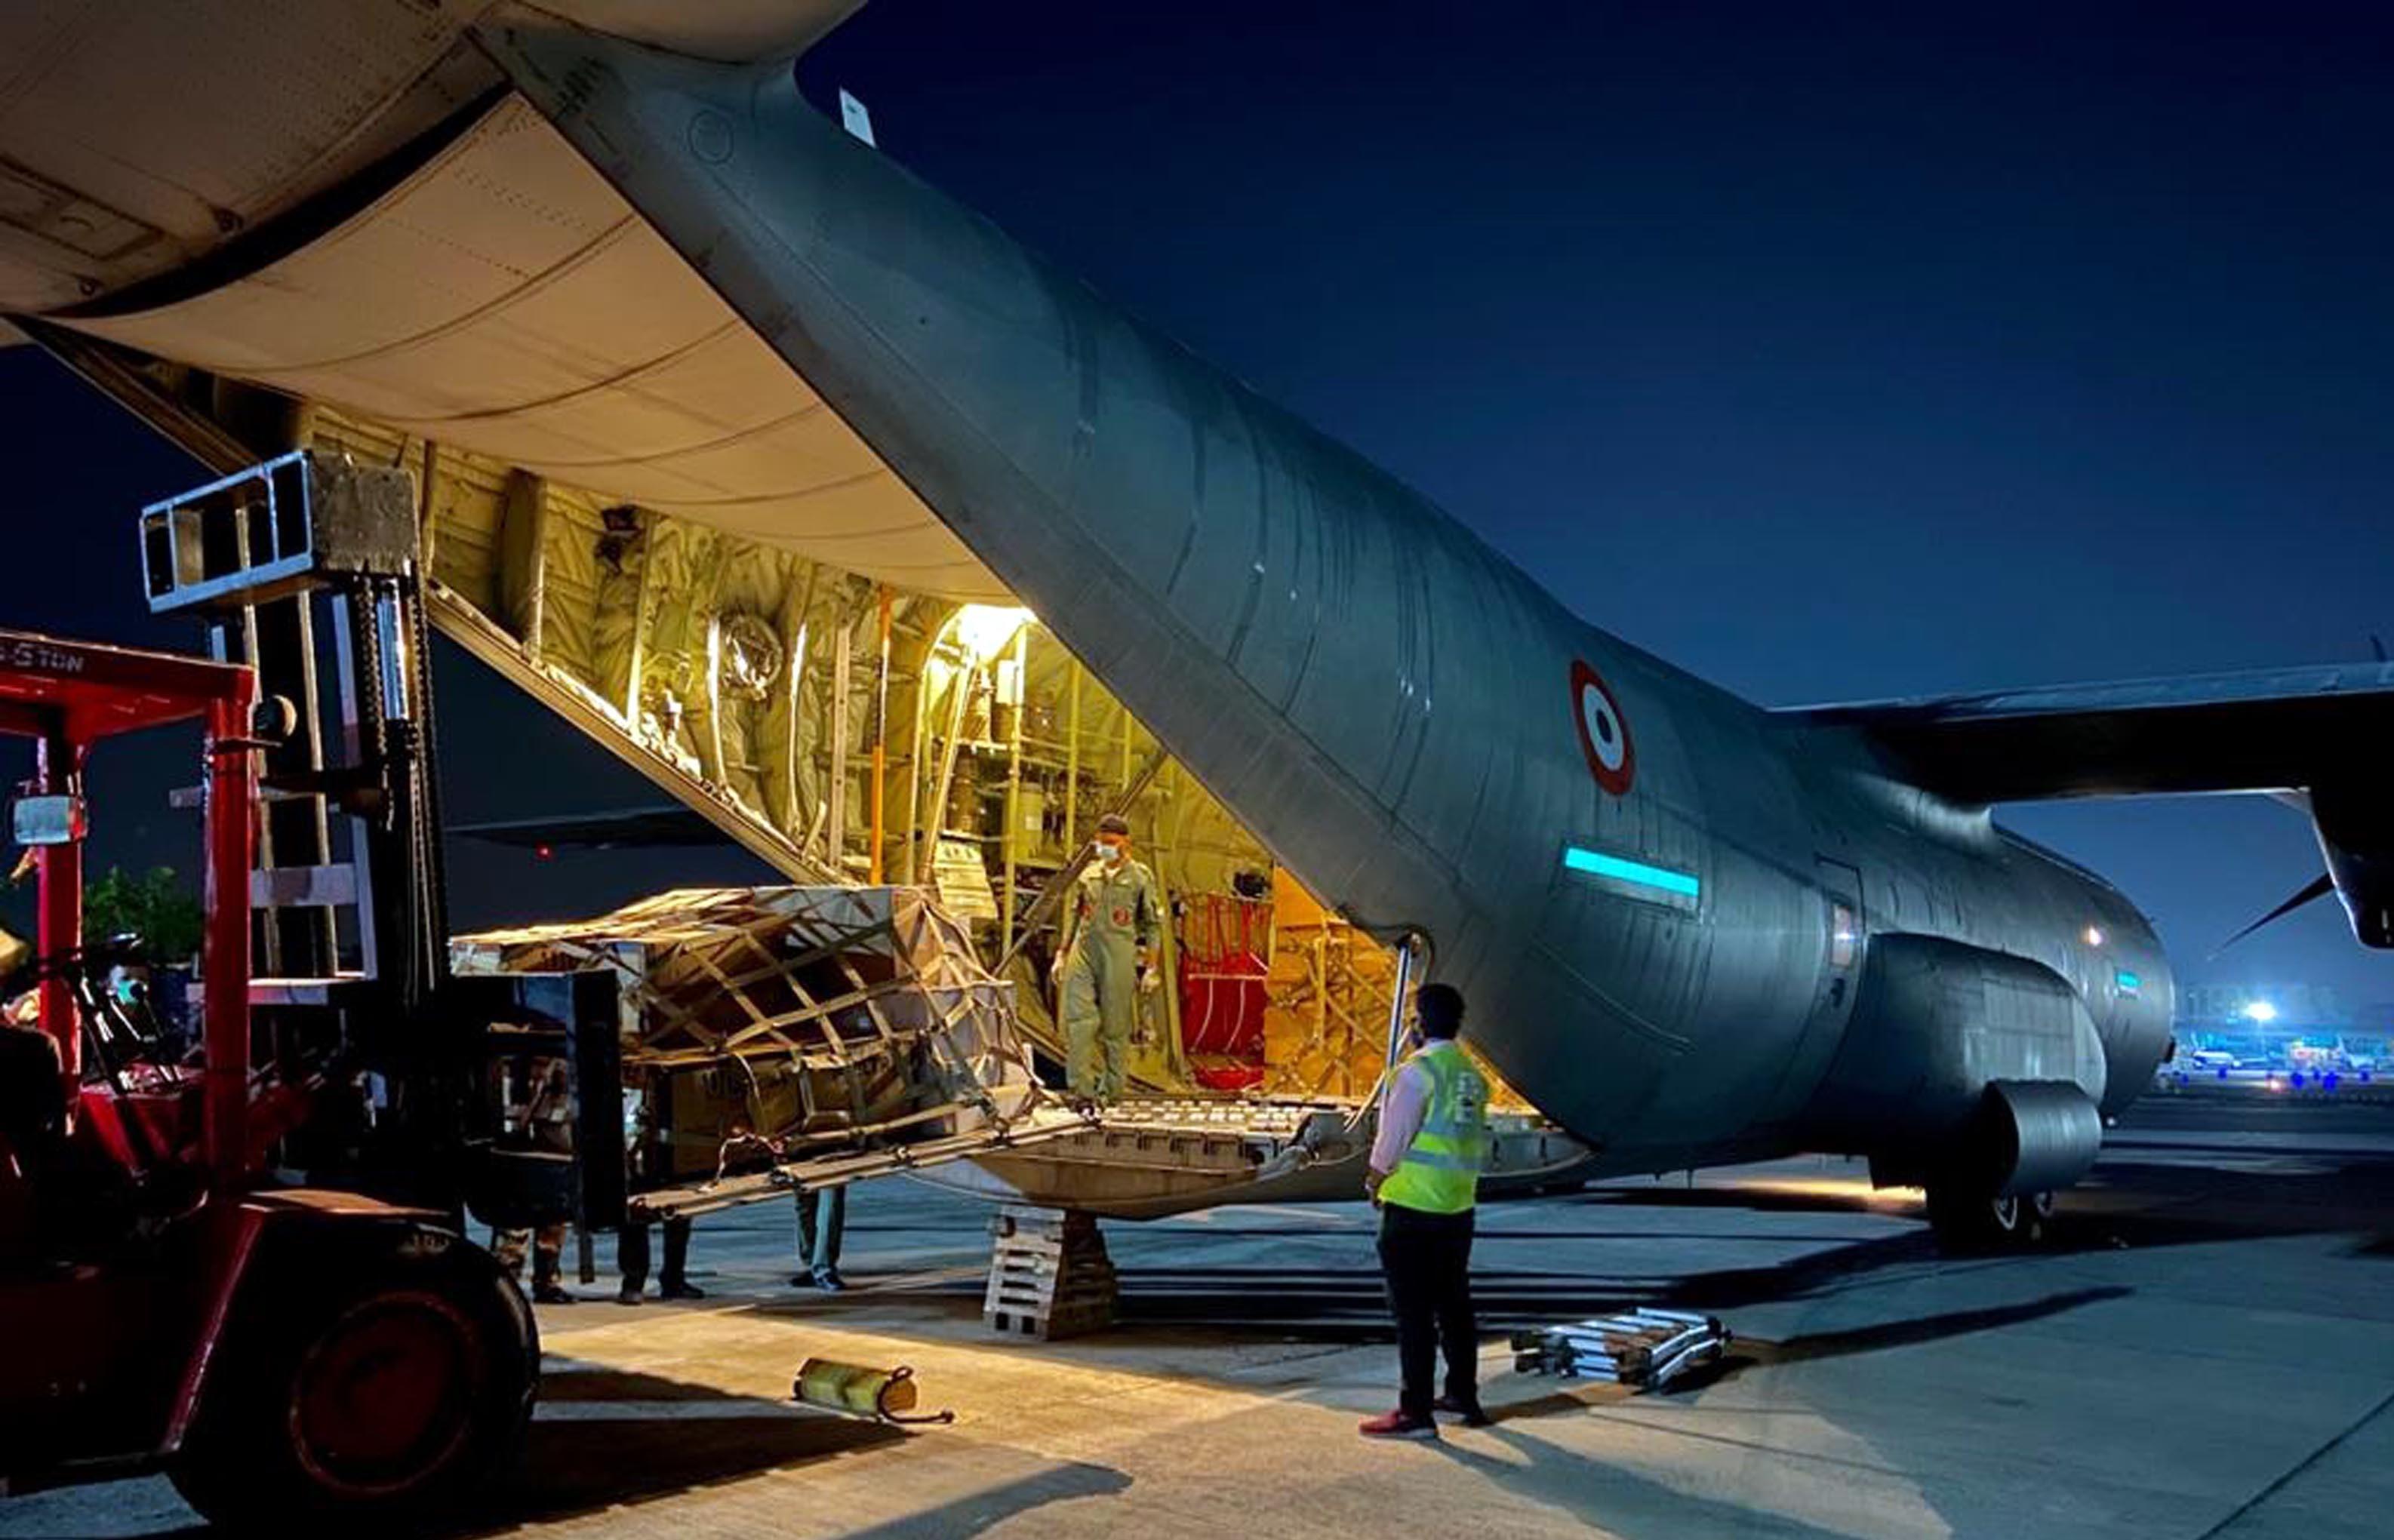 Vizag gas leak: IAF deploys 2 transport aircraft to airlift essential chemicals